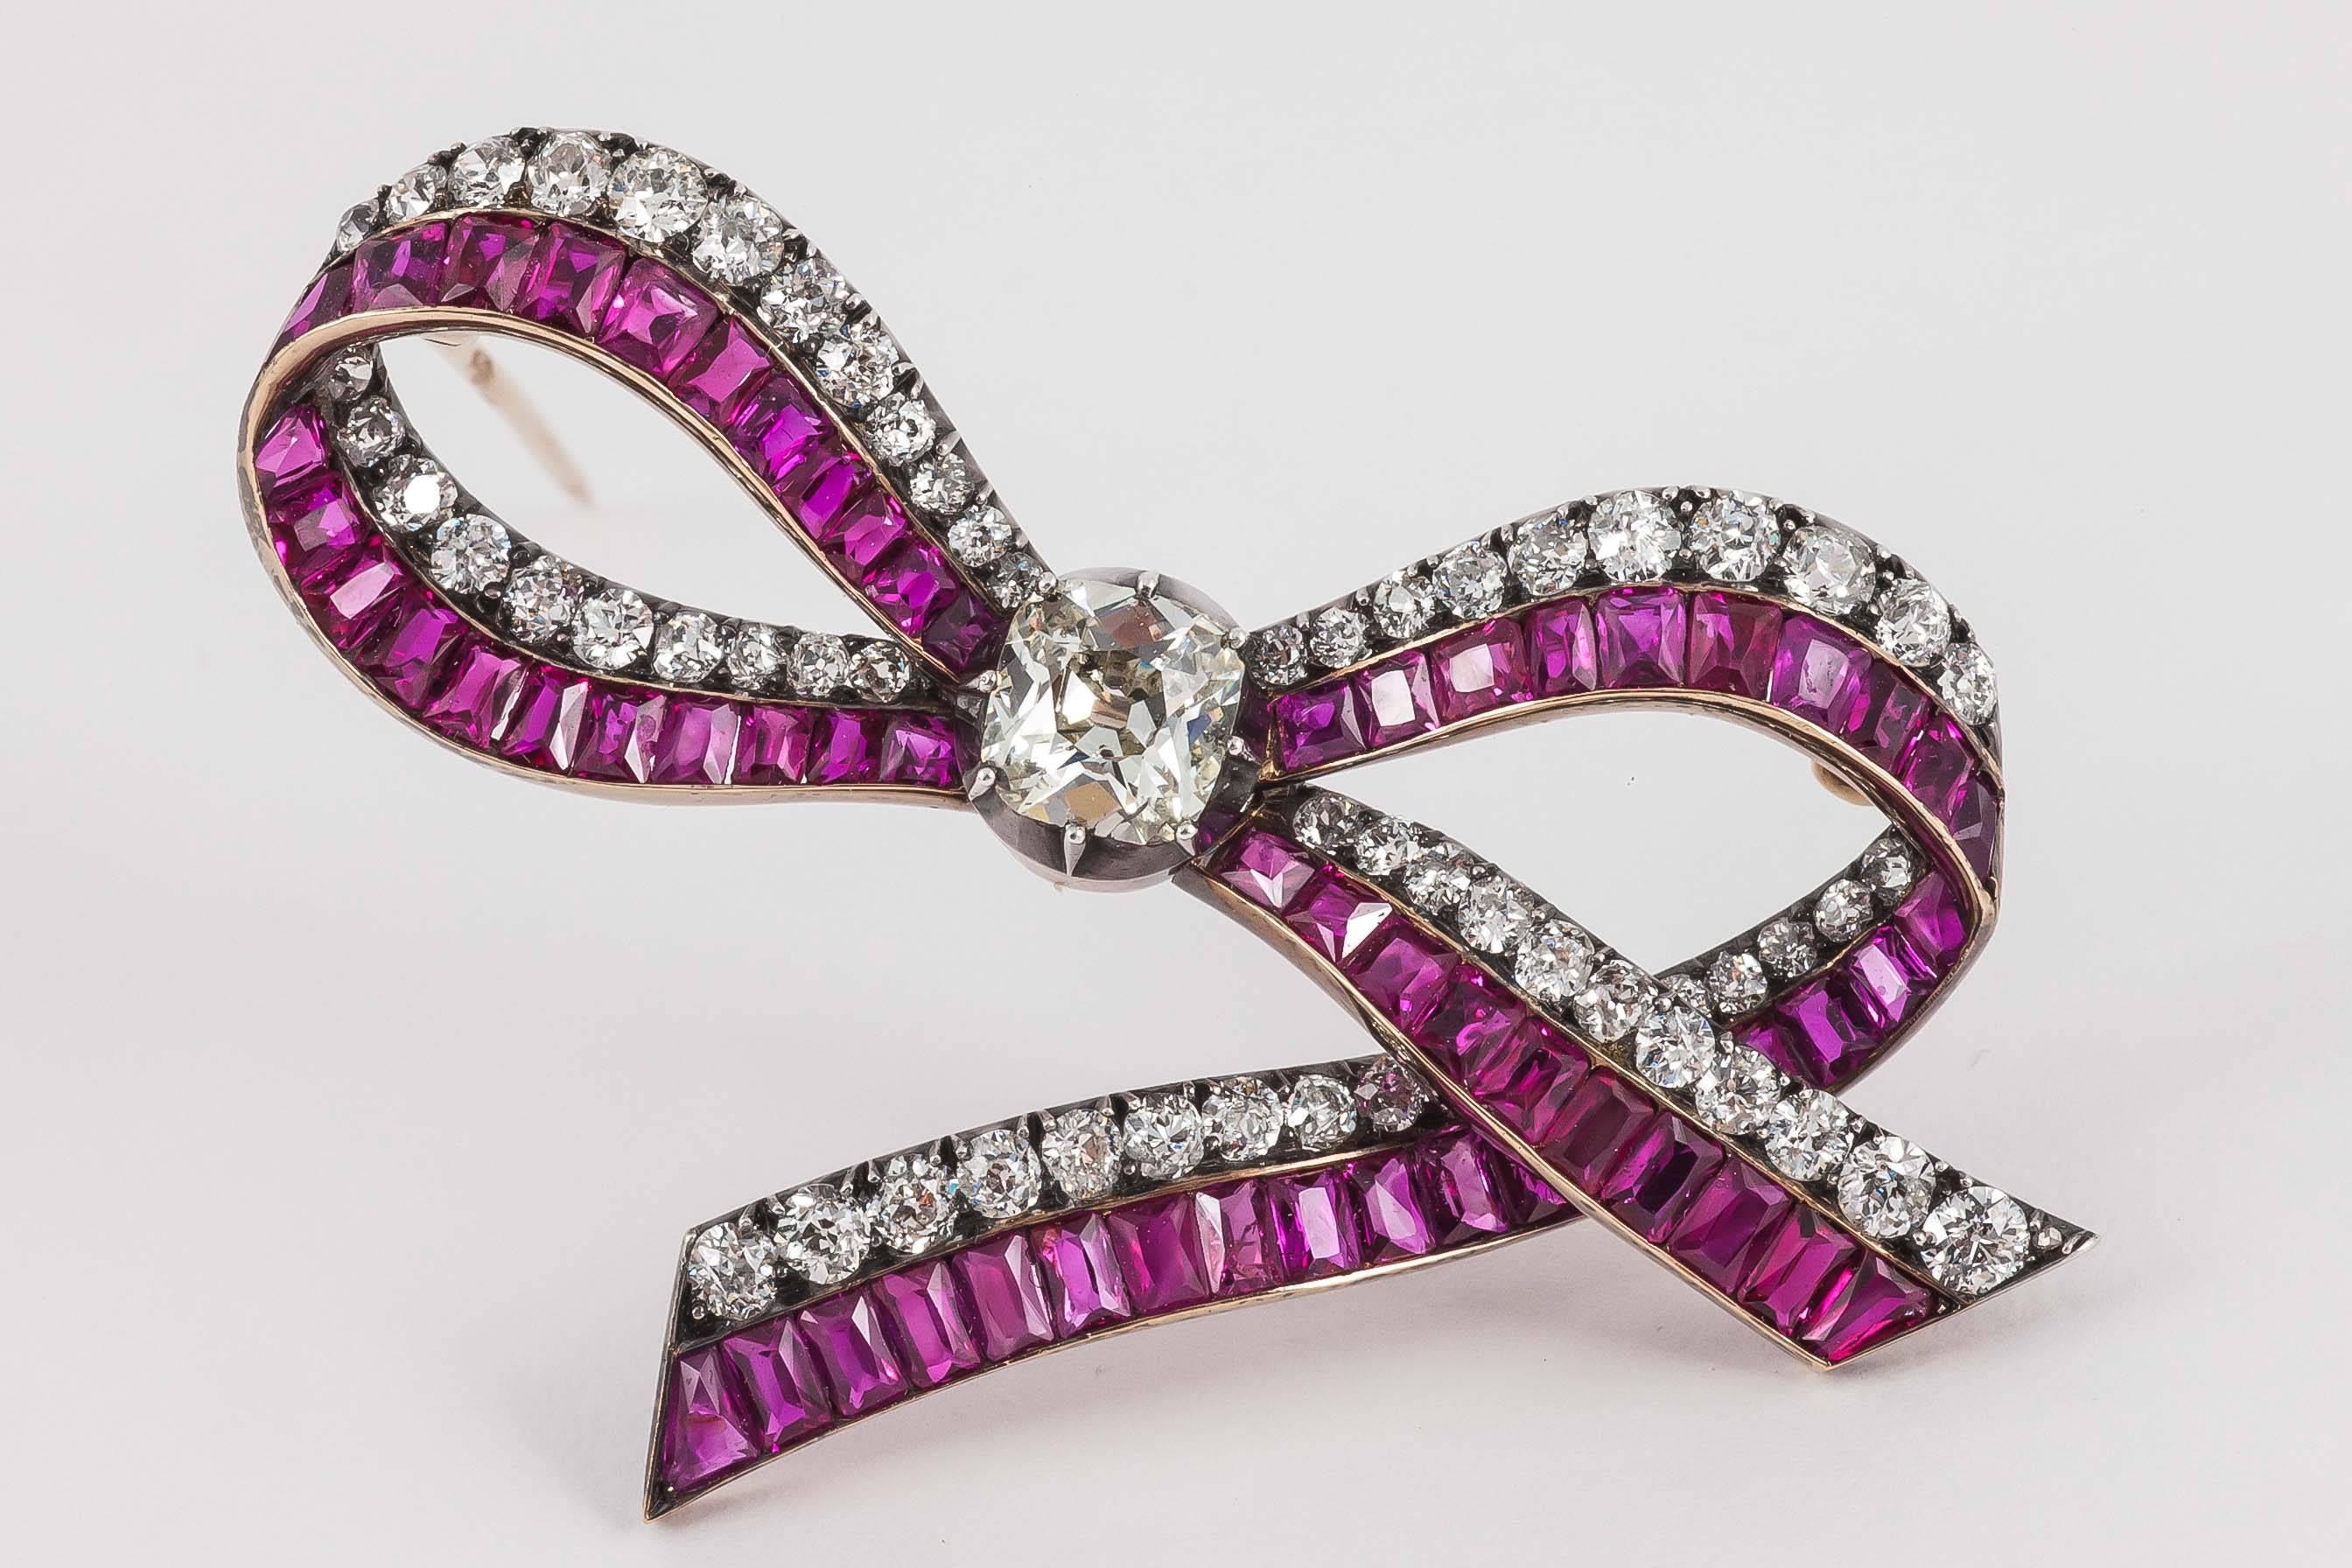 A very fine Austrian,tied ribbon brooch,set with old cut brilliant diamonds.and channel set,shaped Burma Rubies,mounted in silver and gold,c,1870.The brooch fitting detachable.